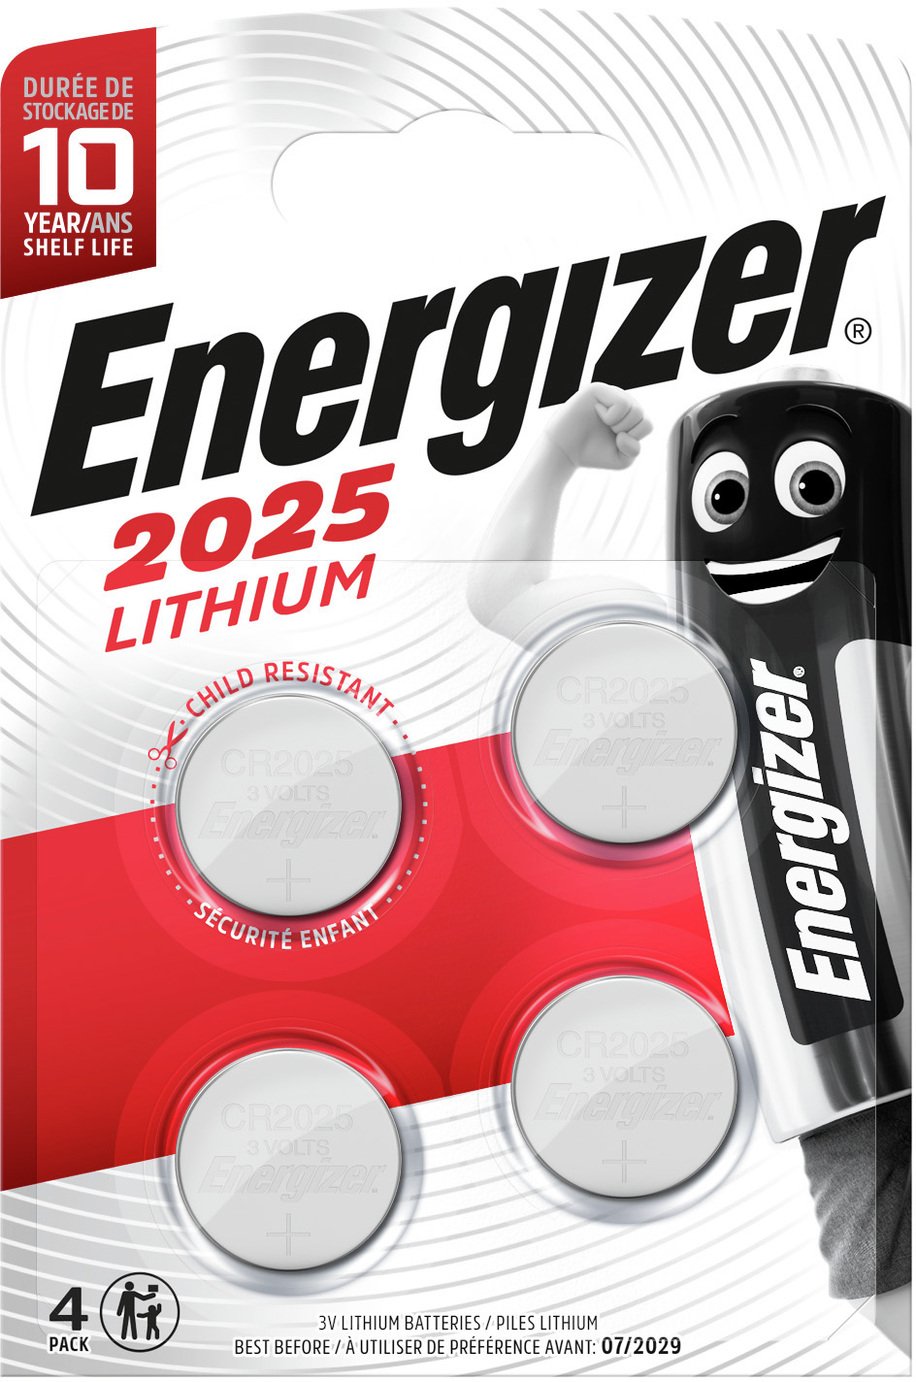 Energizer 2025 Lithium Coin Batteries Review